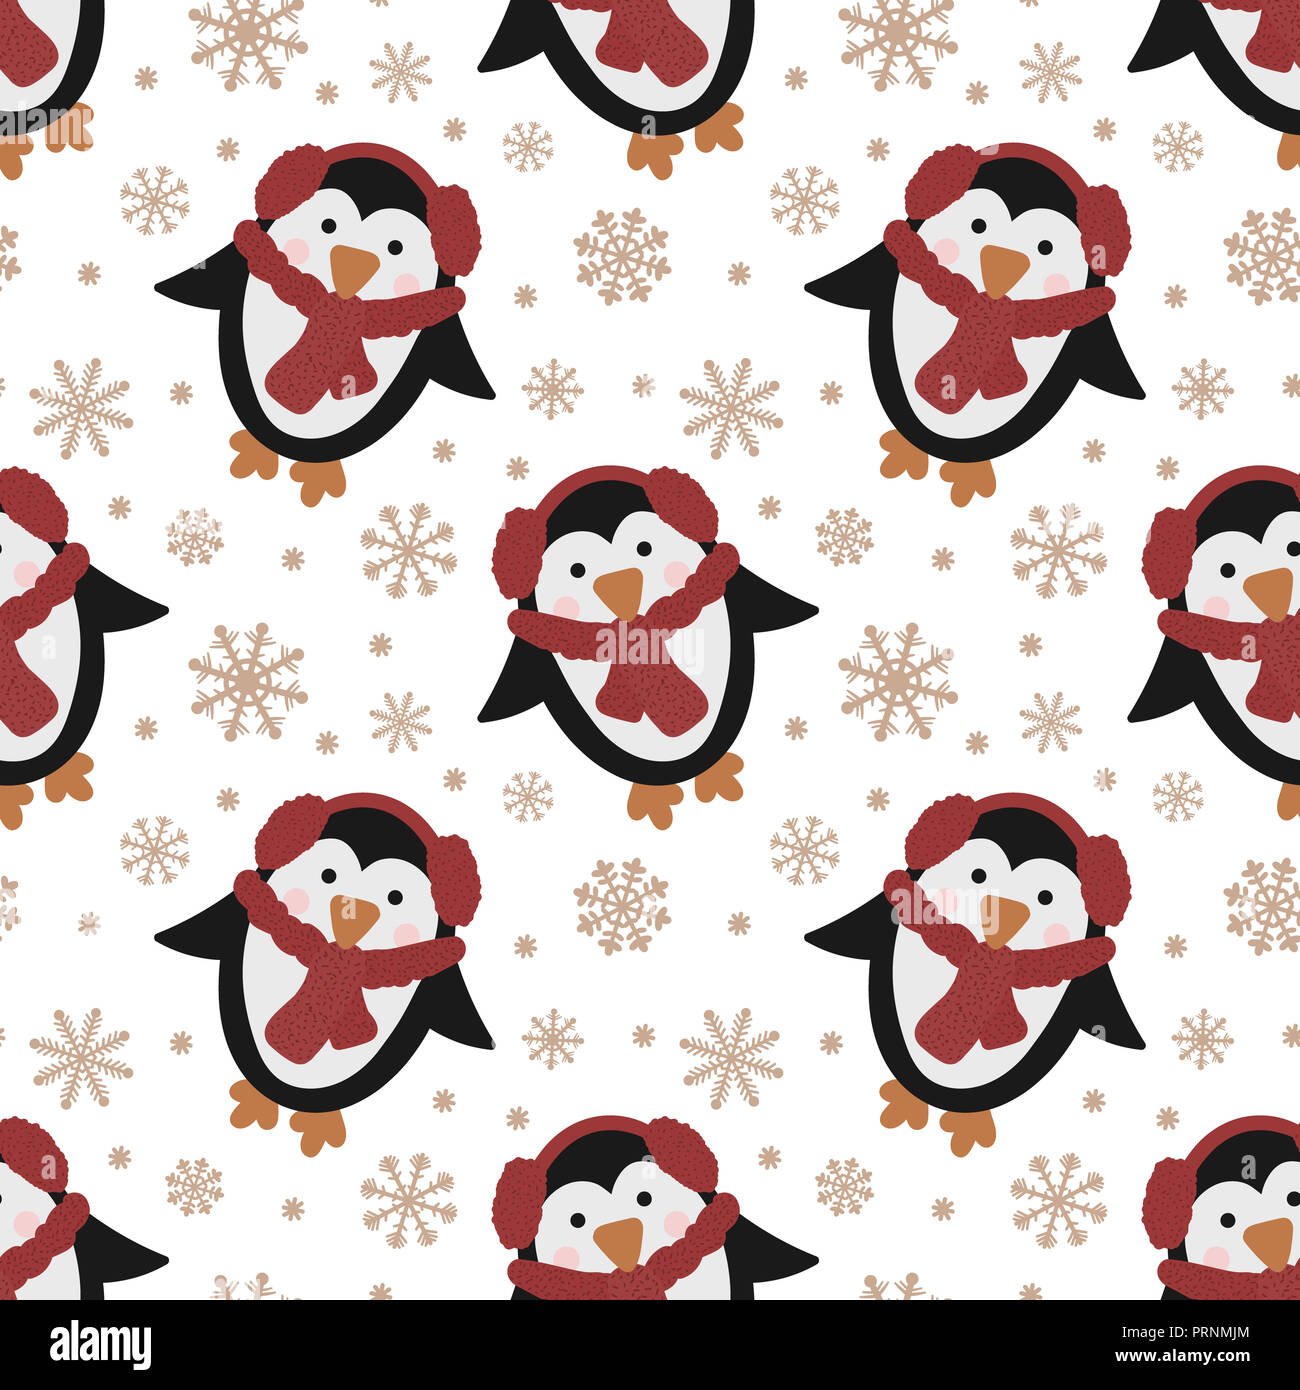 Seamless pattern for Christmas and New Year. Vector hand-drawn illustration of a cute penguin in a red scarf and snowflakes. Stock Photo